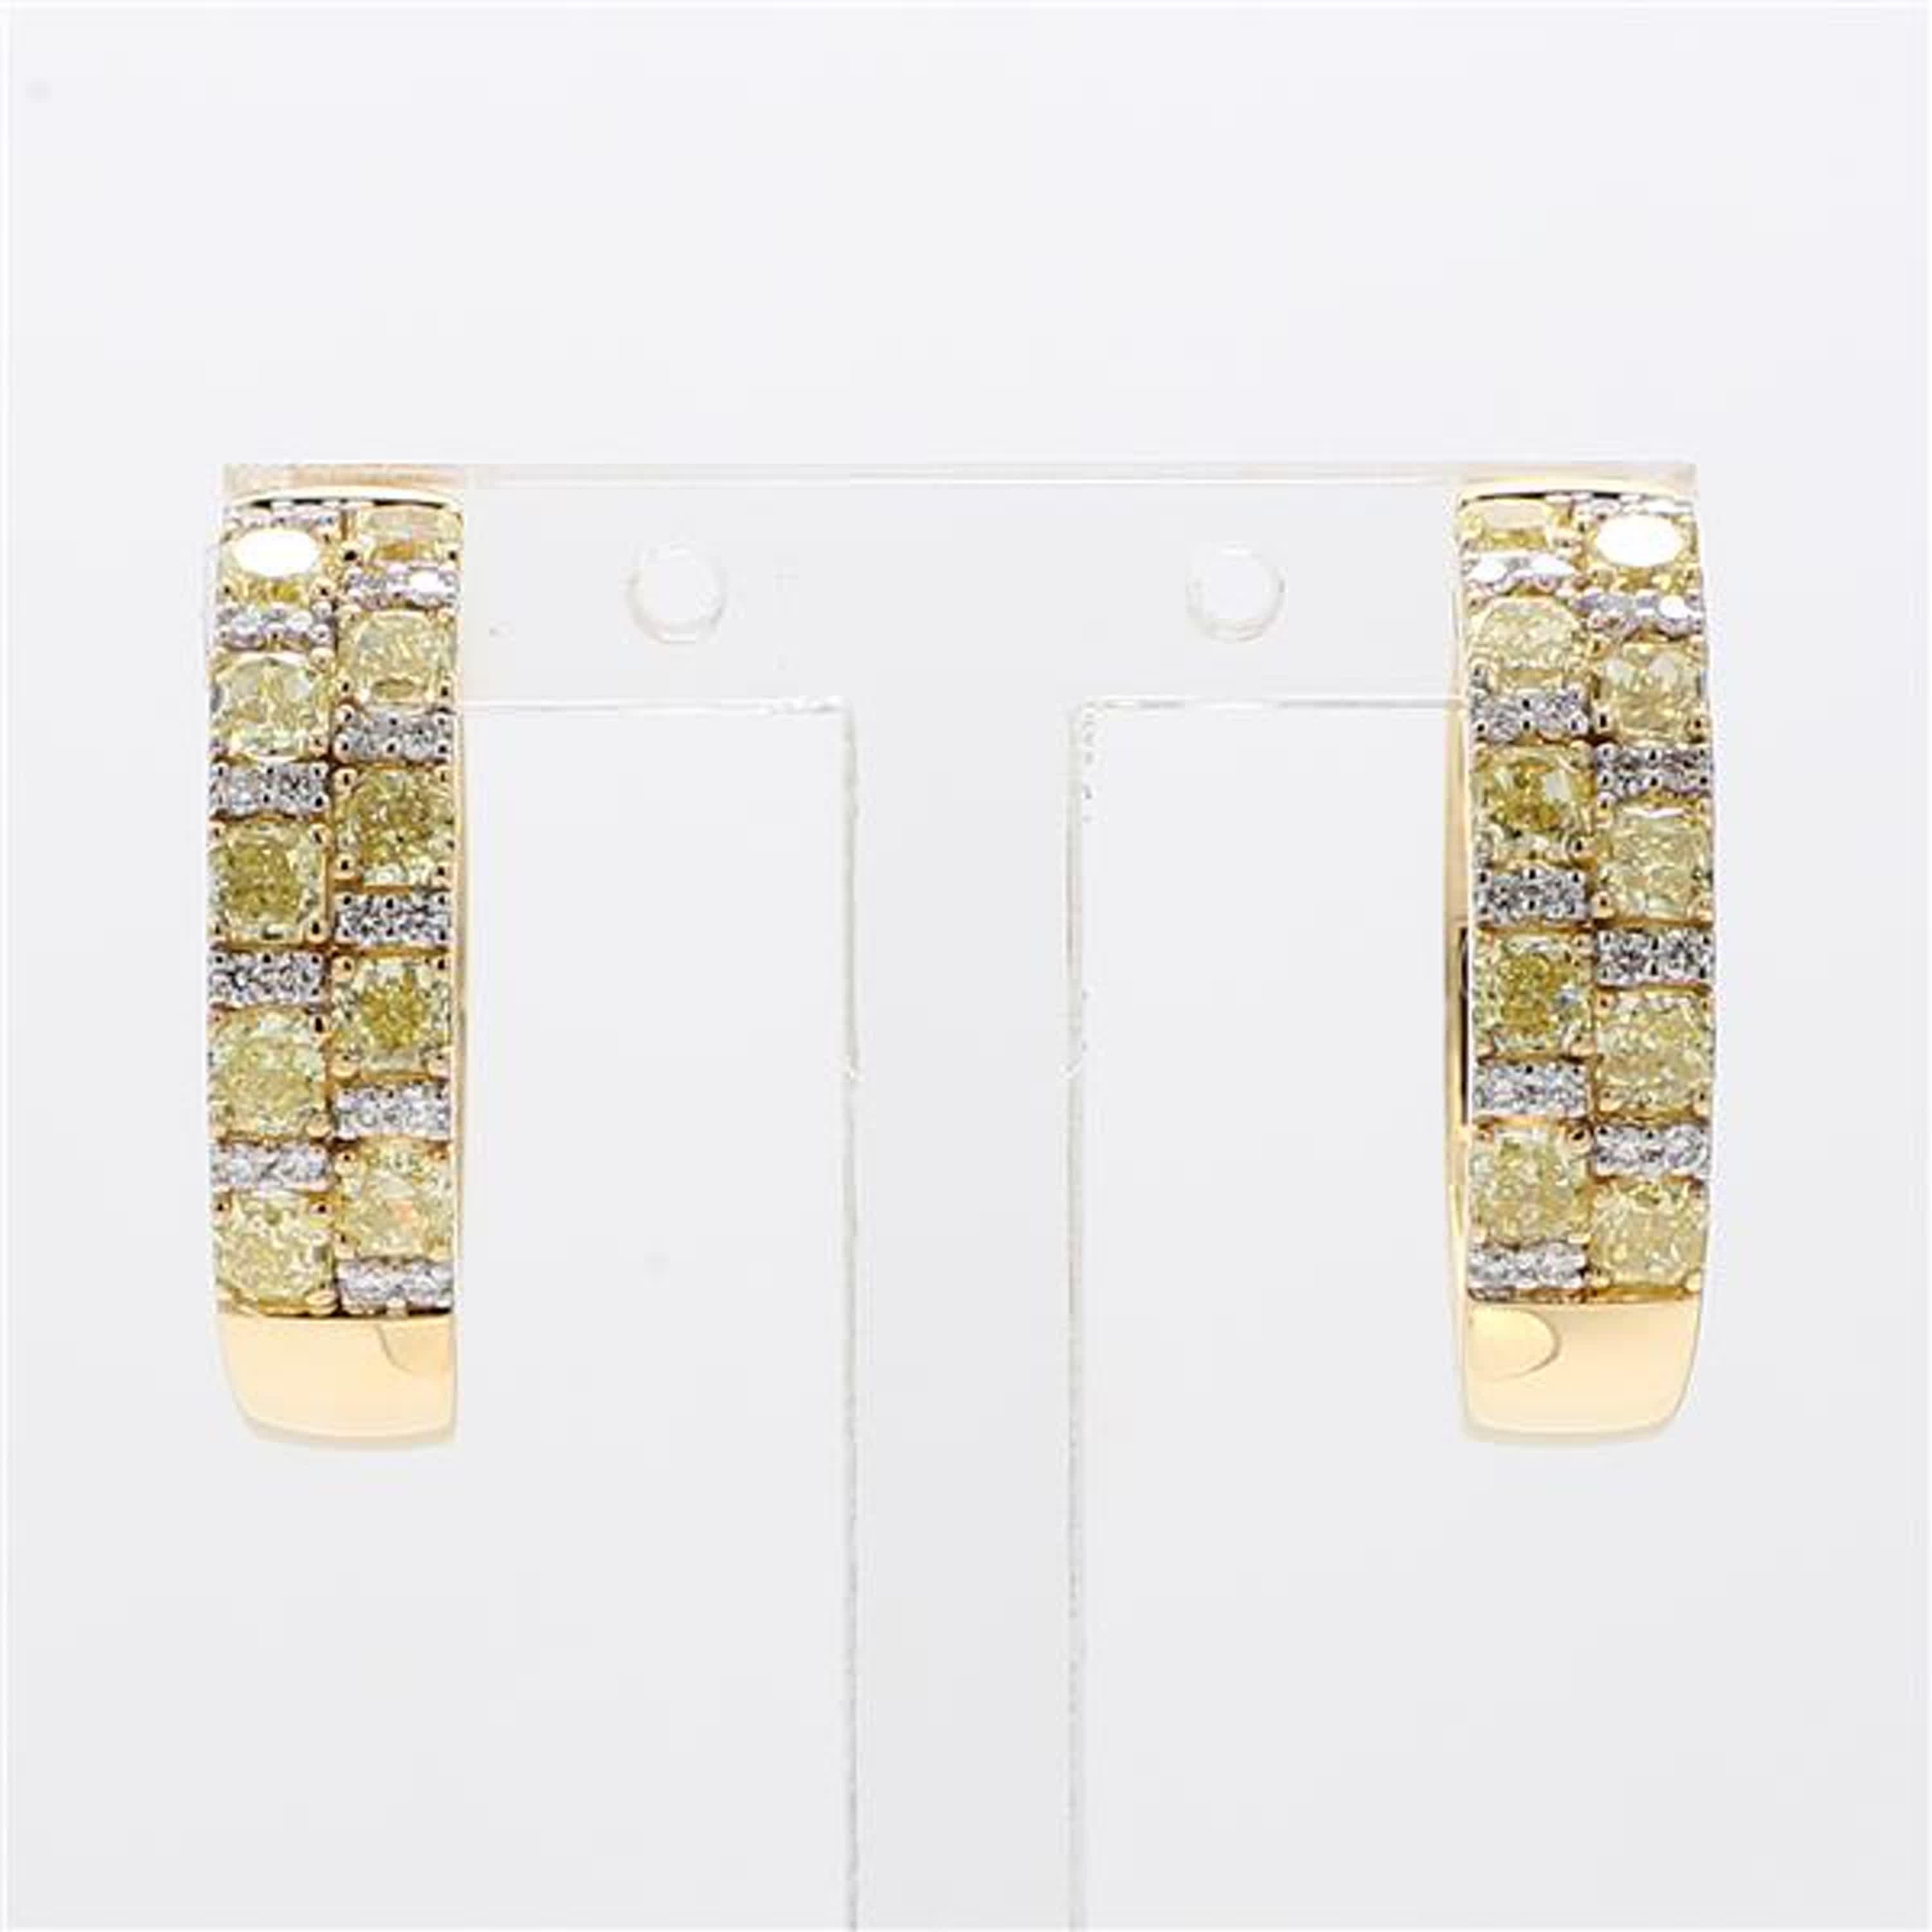 RareGemWorld's classic diamond earrings. Mounted in a beautiful 18K Yellow Gold setting with natural radiant cut yellow diamonds complimented by round natural white diamond melee. These earrings are guaranteed to impress and enhance your personal